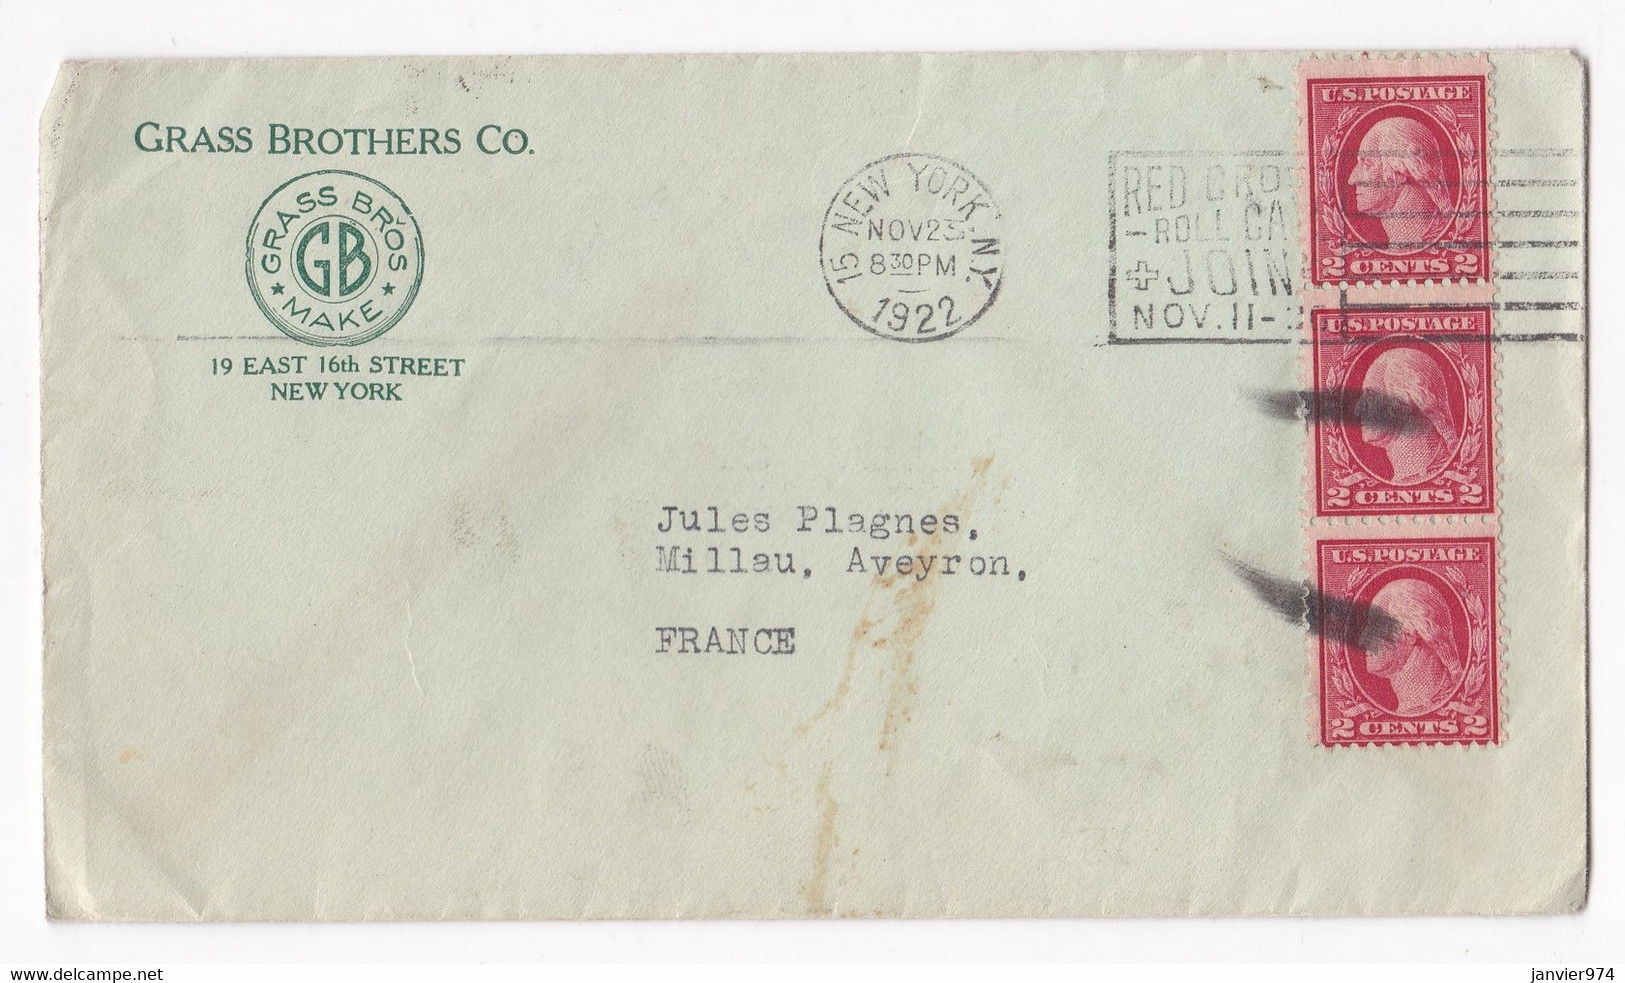 Enveloppe 1922 Grass Brothers Co New York  Pour Millau Aveyron France - Covers & Documents